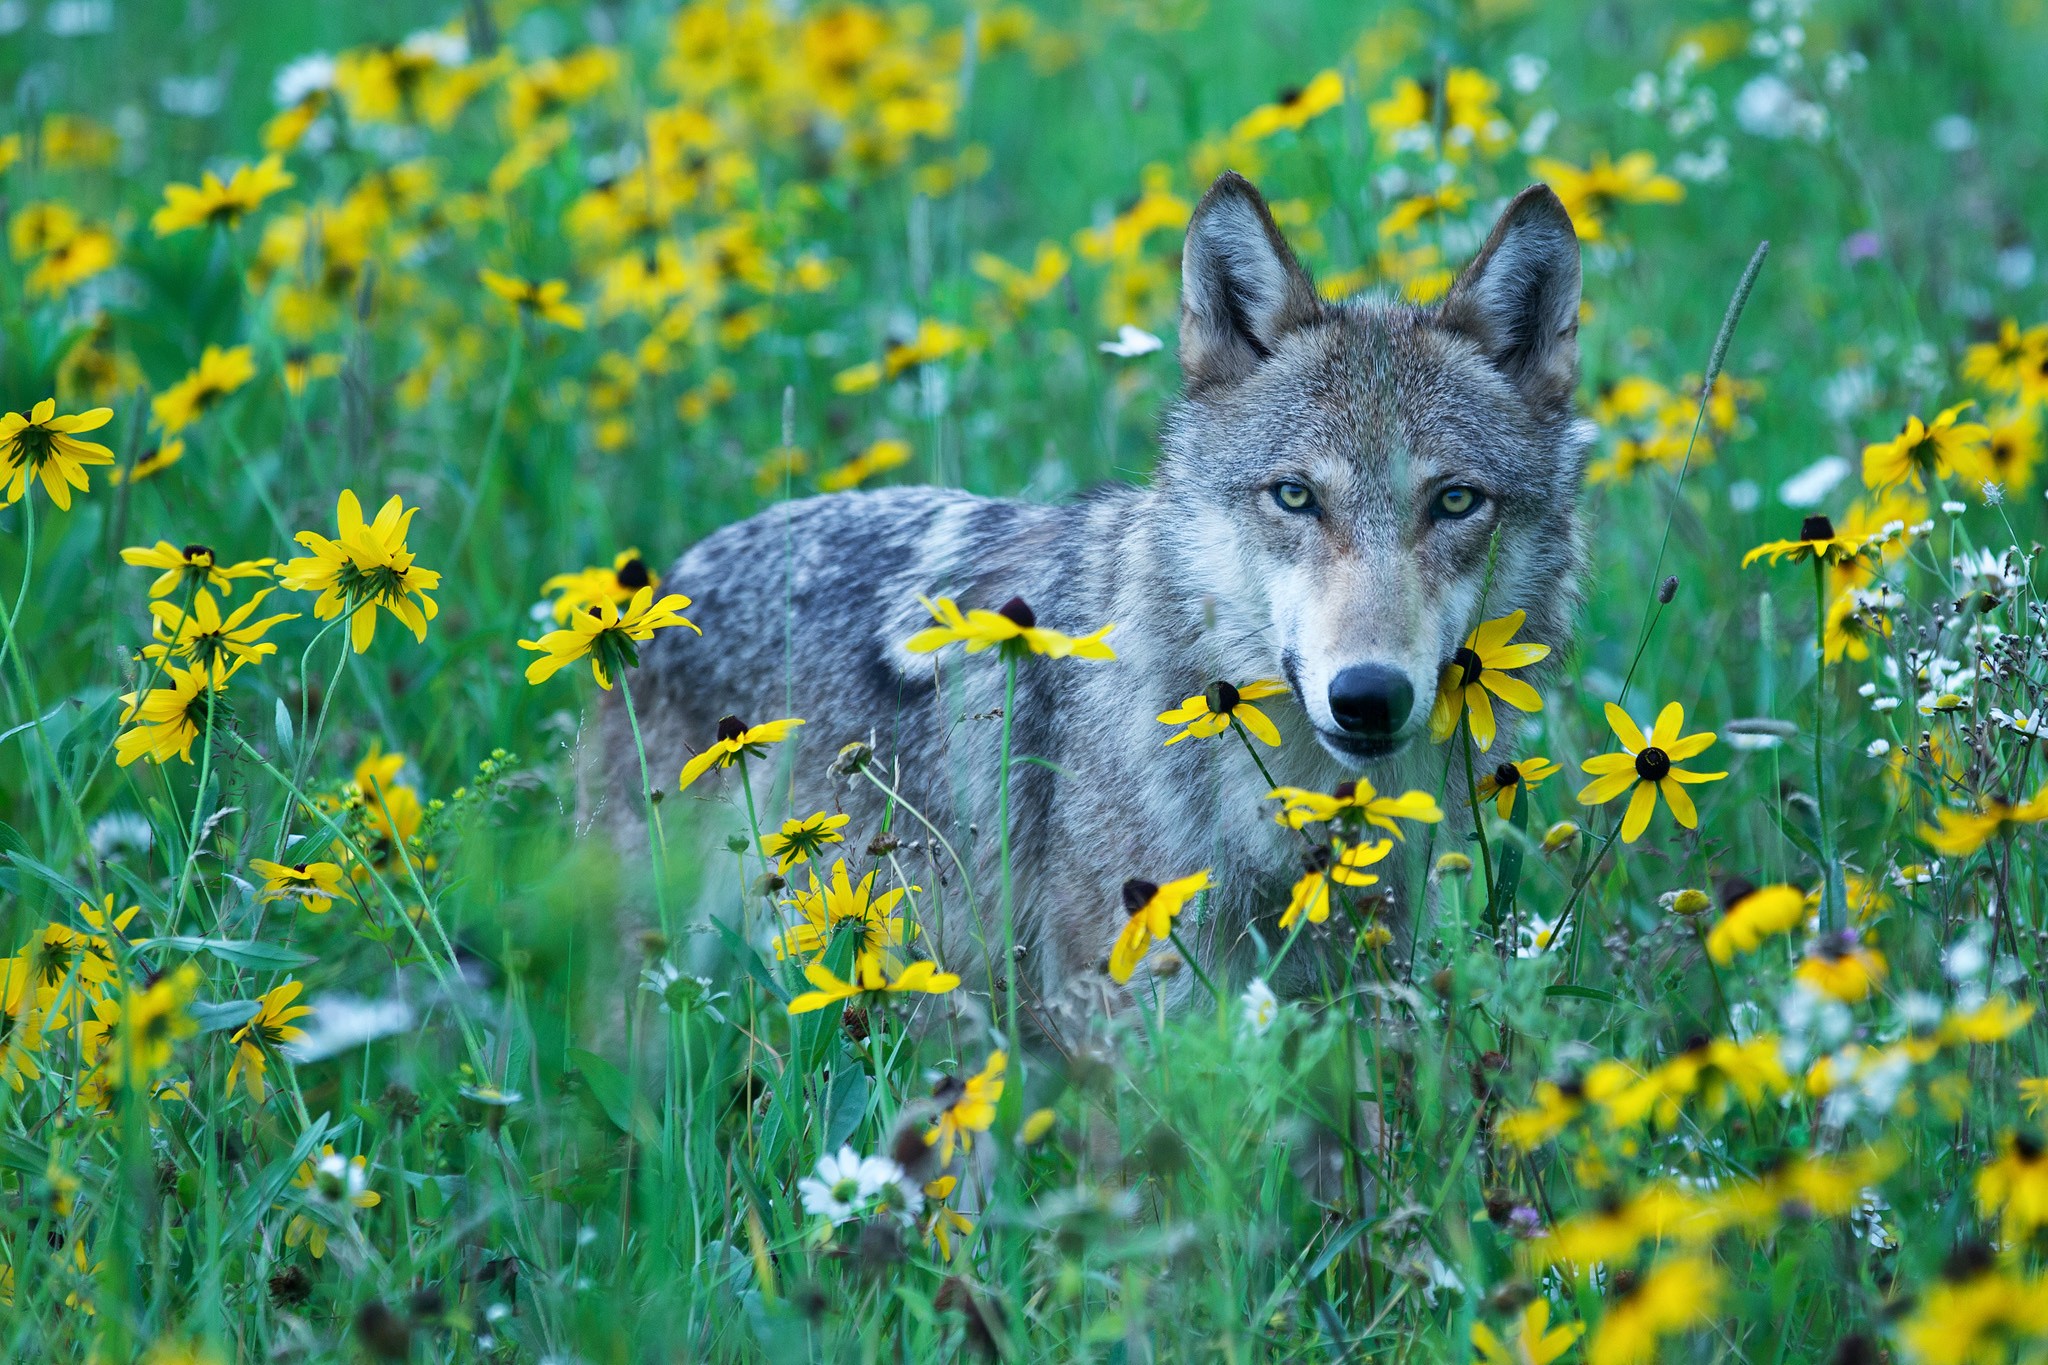 General 2048x1365 animals wolf mammals nature plants flowers yellow flowers outdoors